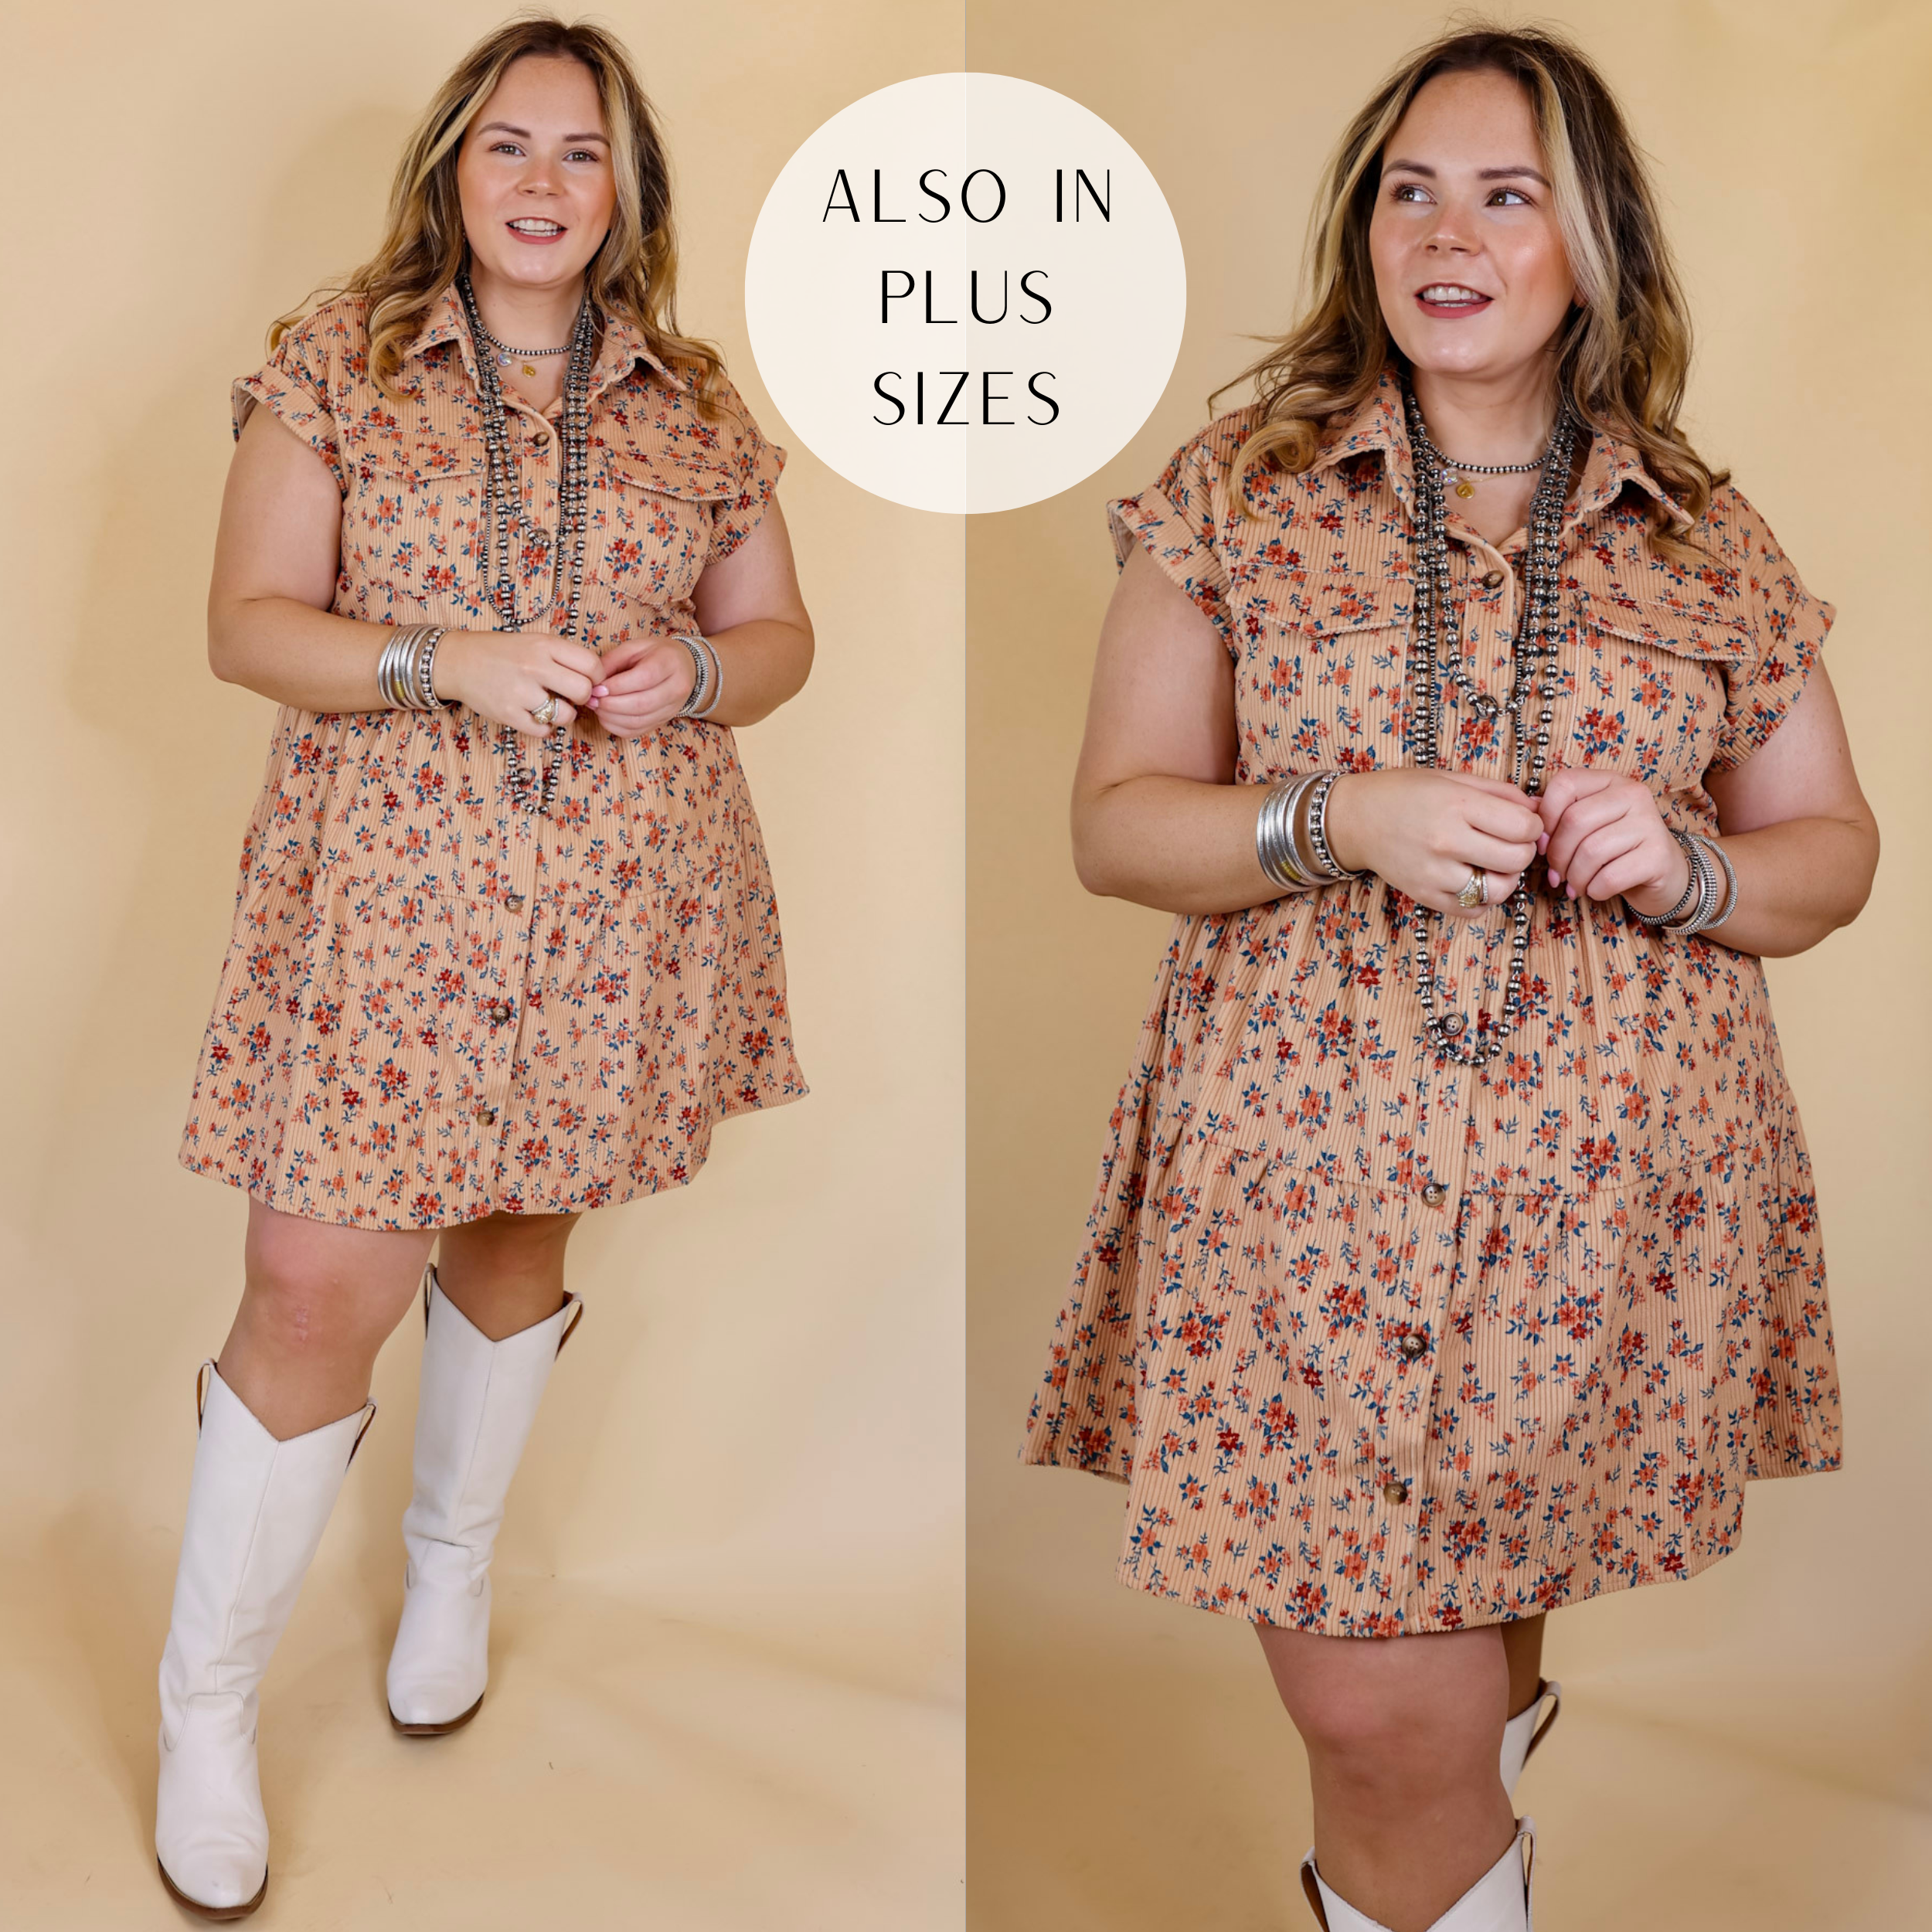 Model is wearing a button down corduroy dress in tan floral. Model has this dress paired with tall, white boots and Navajo jewelry. Background is a solid tan. 